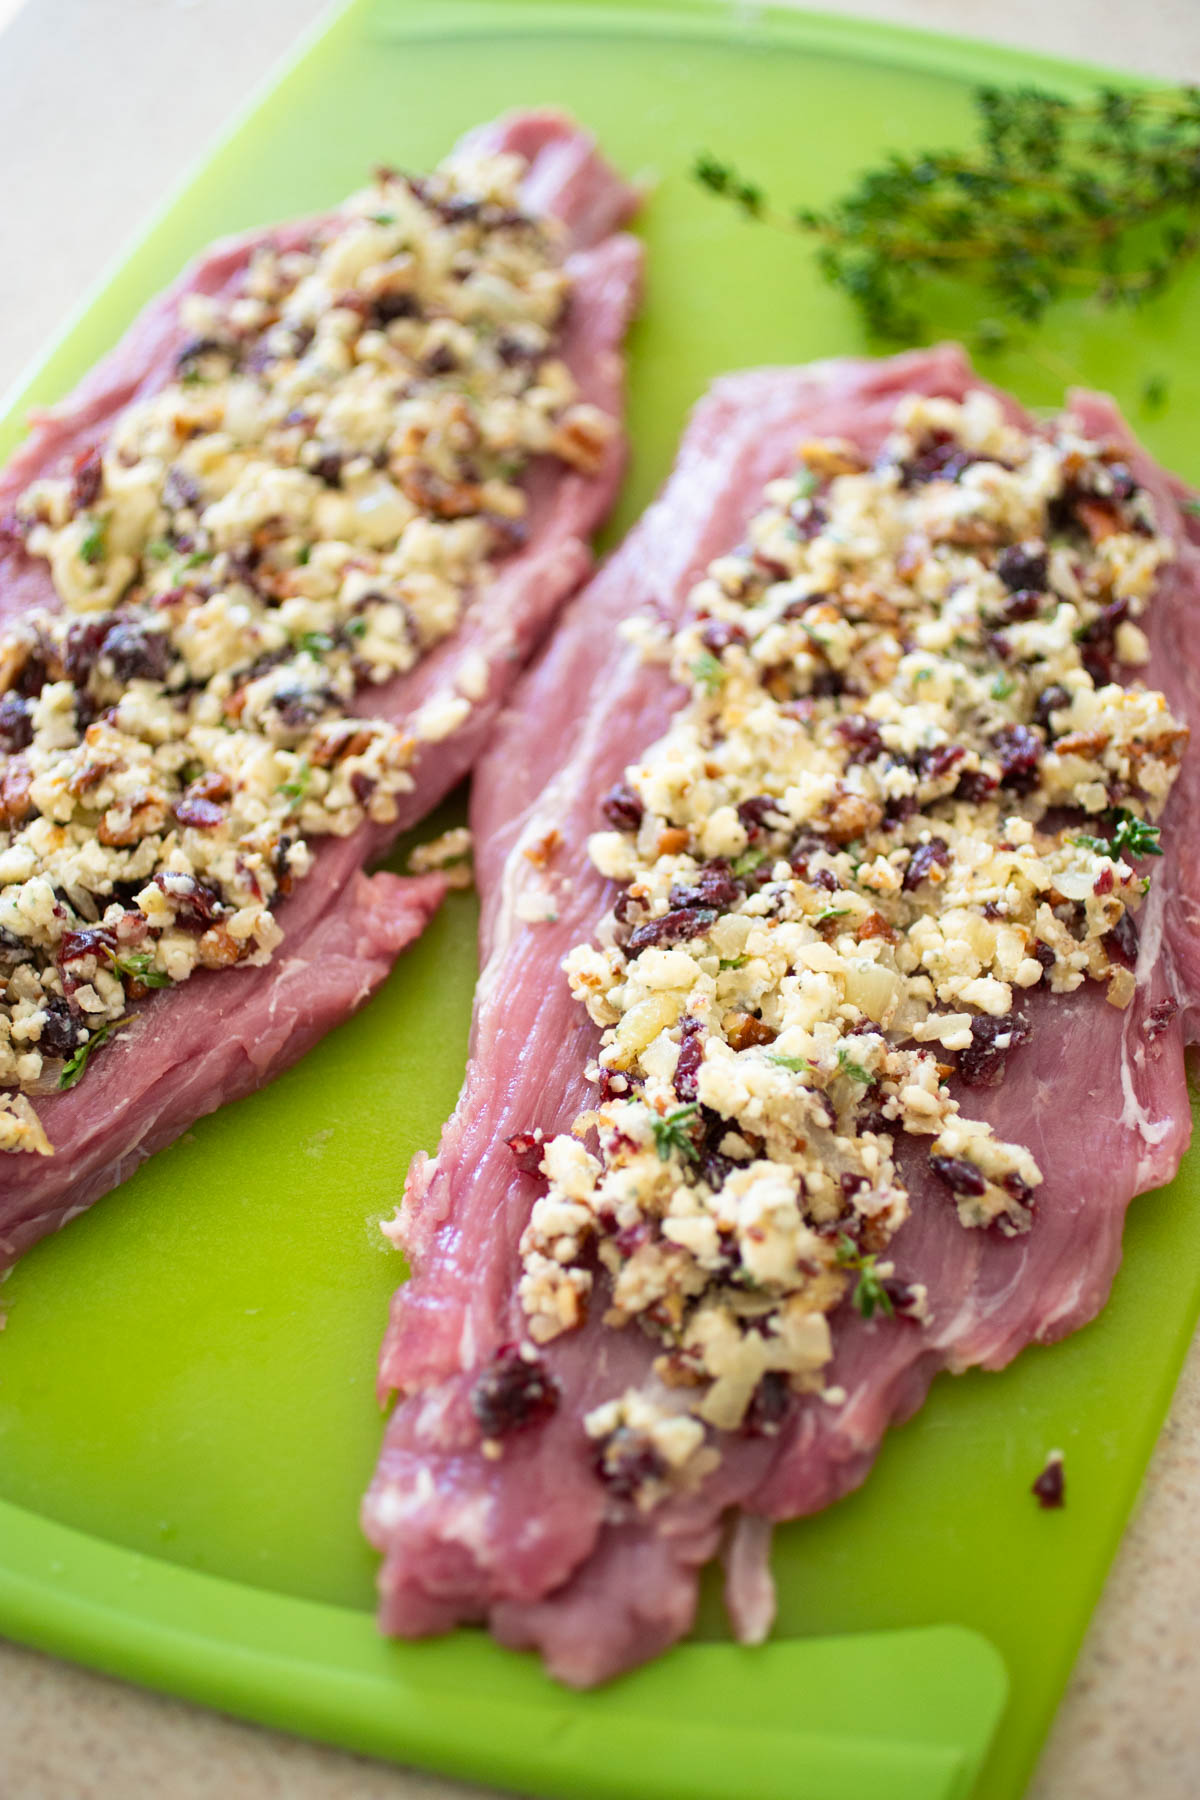 The pork tenderloins have been sliced and rolled flat so they can be stuffed with the filling which sits on top.